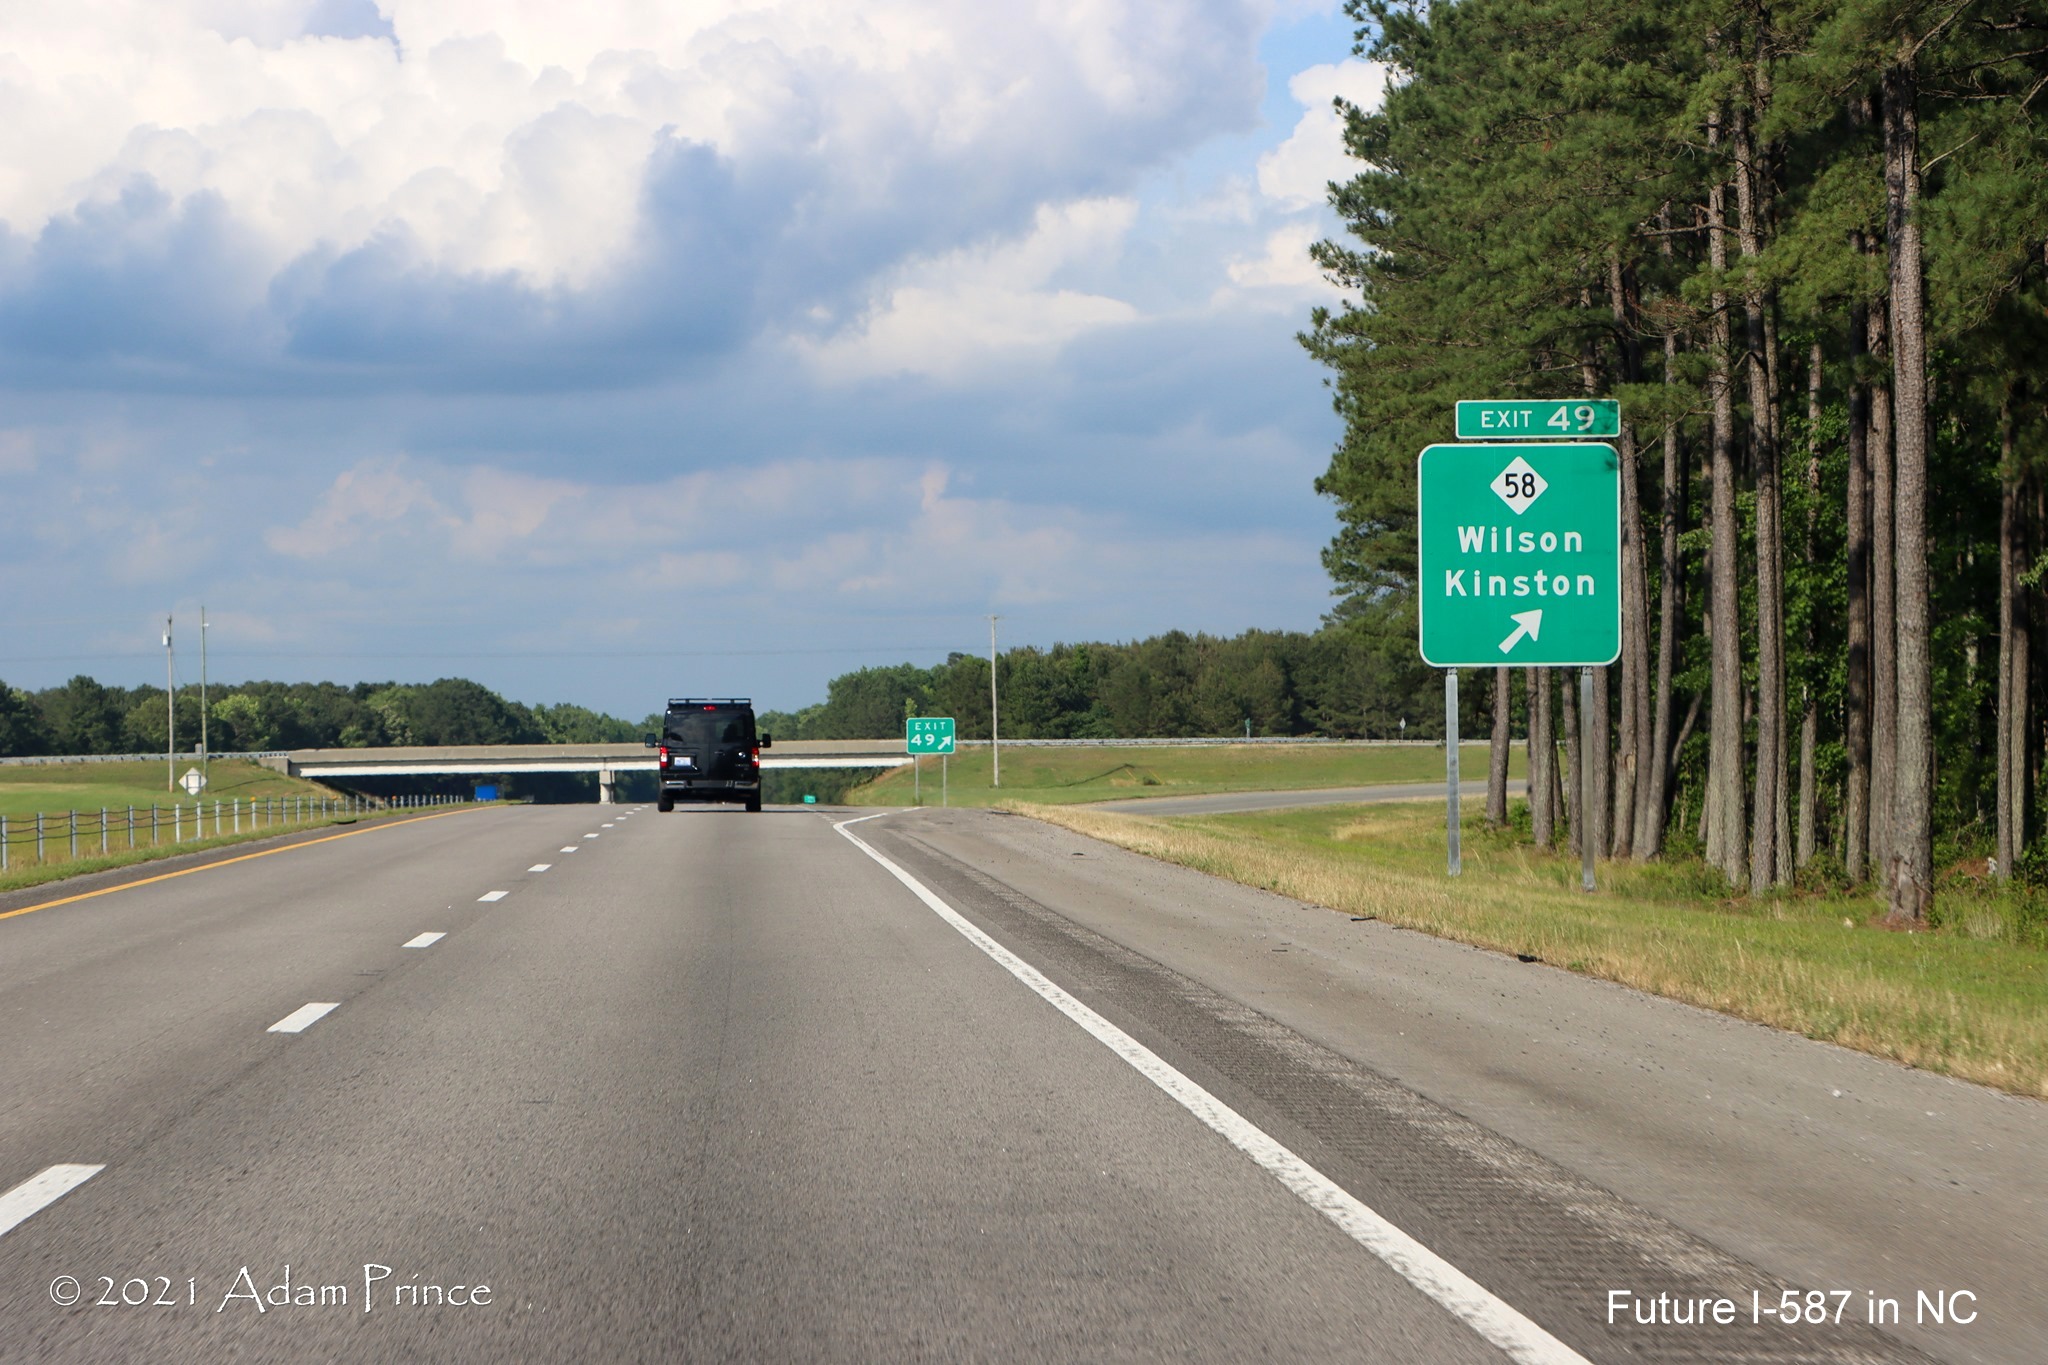 Ground mounted ramp sign for NC 58 exit on US 264 East (Future I-587 South) in Wilson, photo by Adam Prince, June 2021